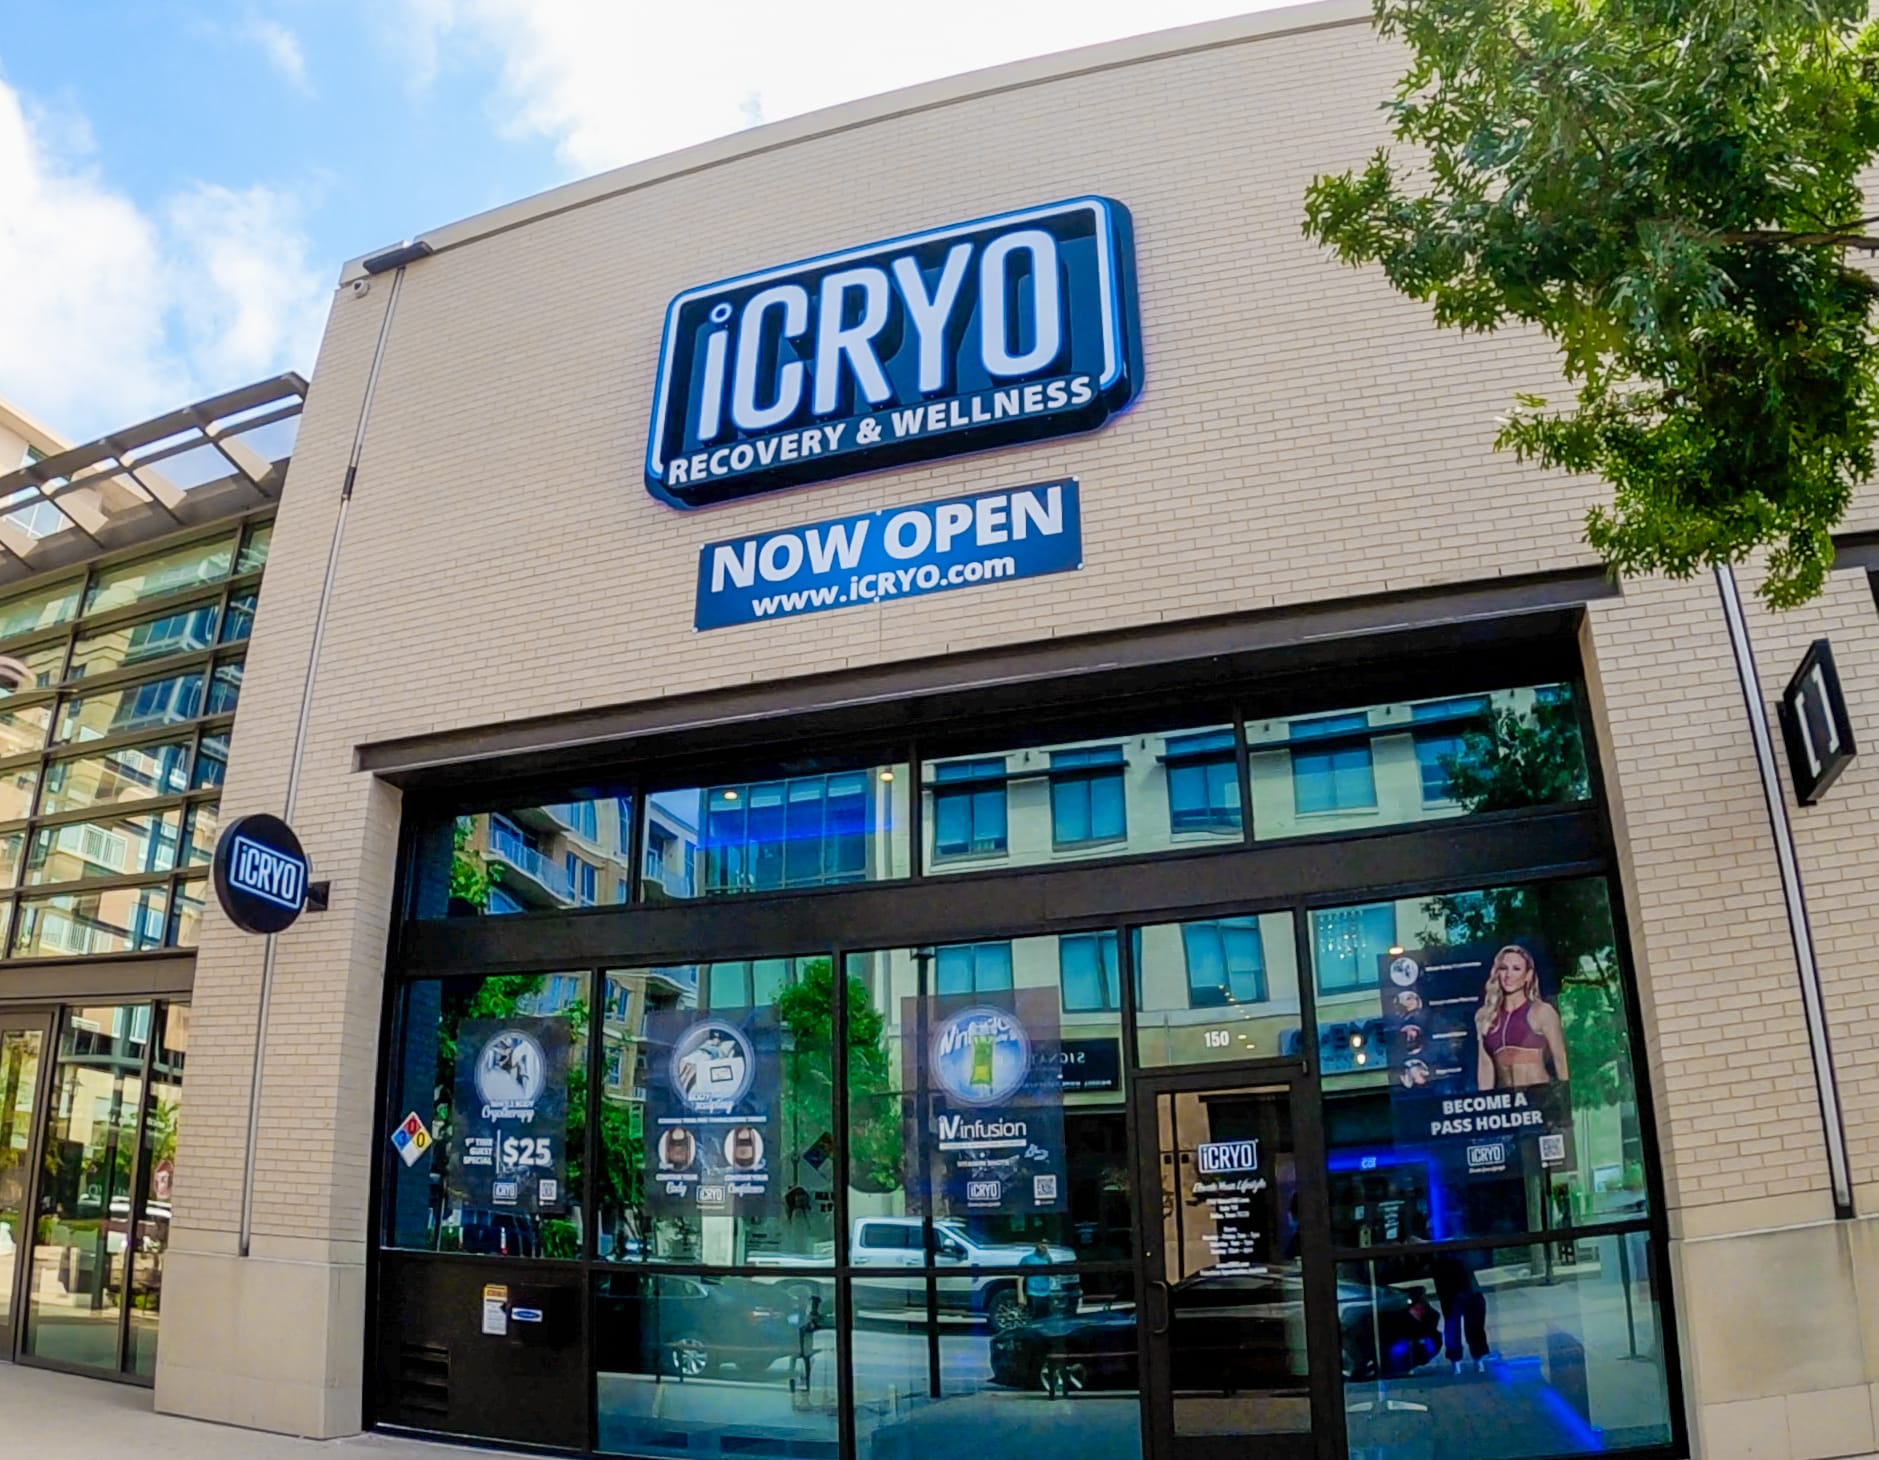 The Process of Becoming an iCRYO Franchisee